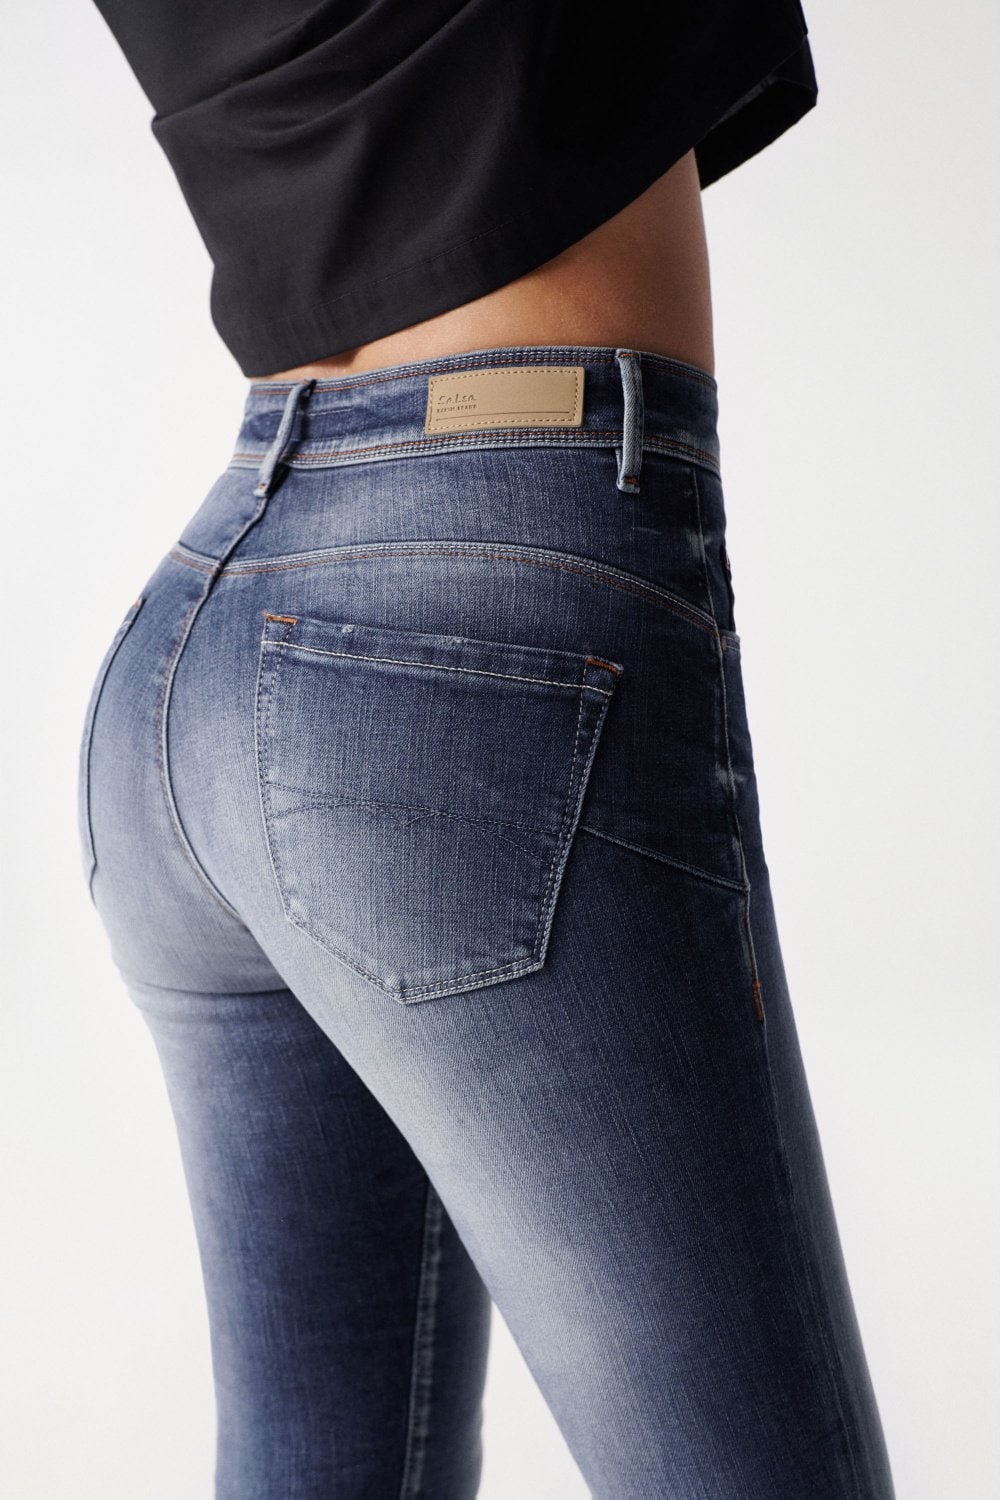 Secret Glamour Cropped Push-In in Dark Wash Jeans Salsa Jeans   